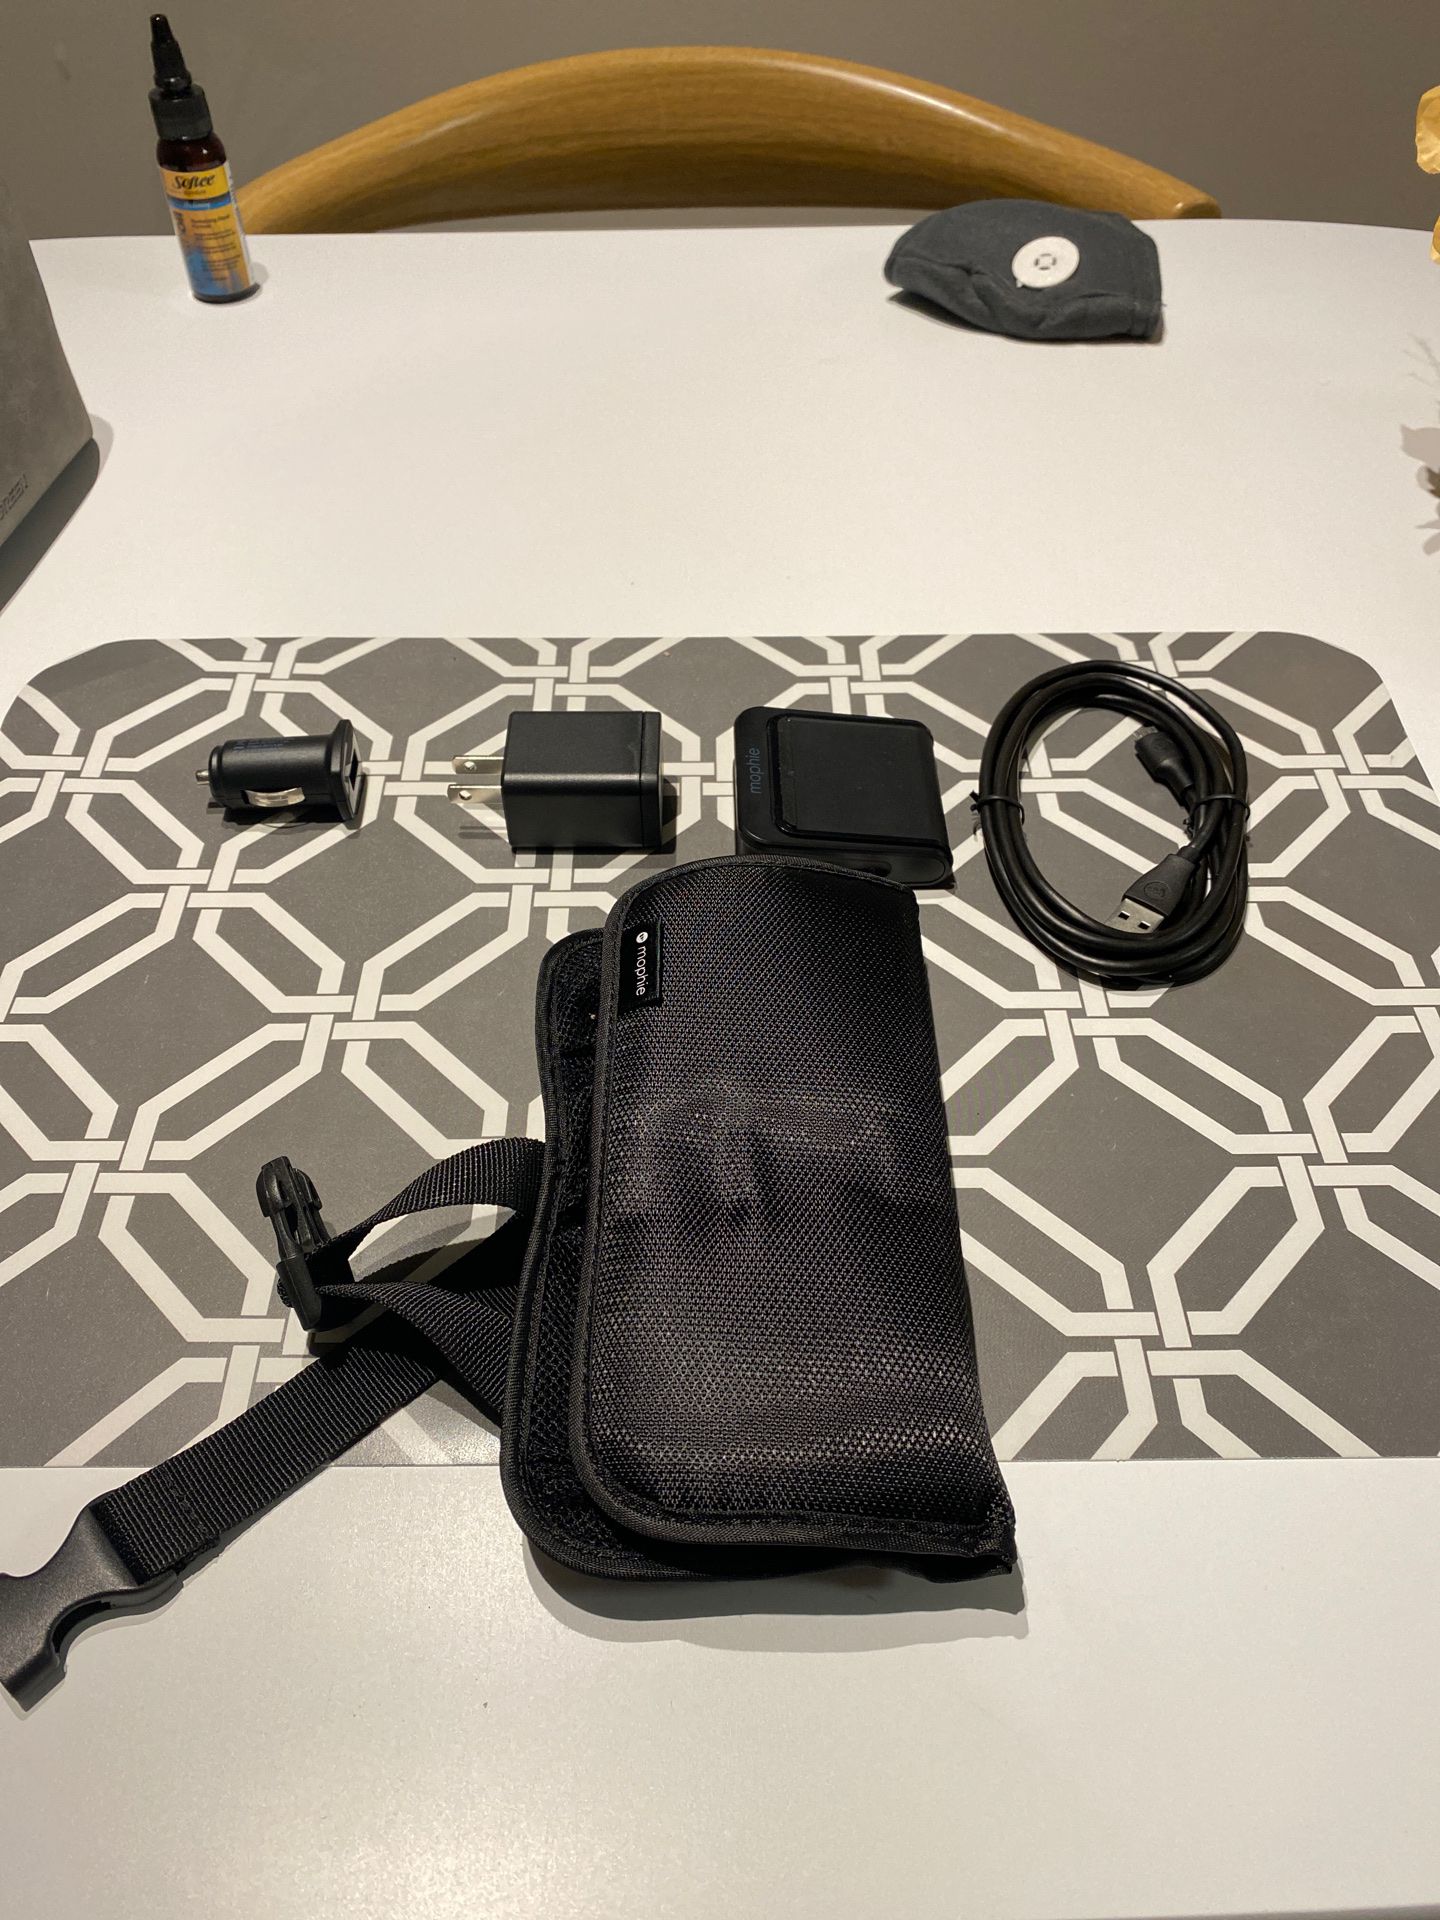 Mophie Portable charging kit